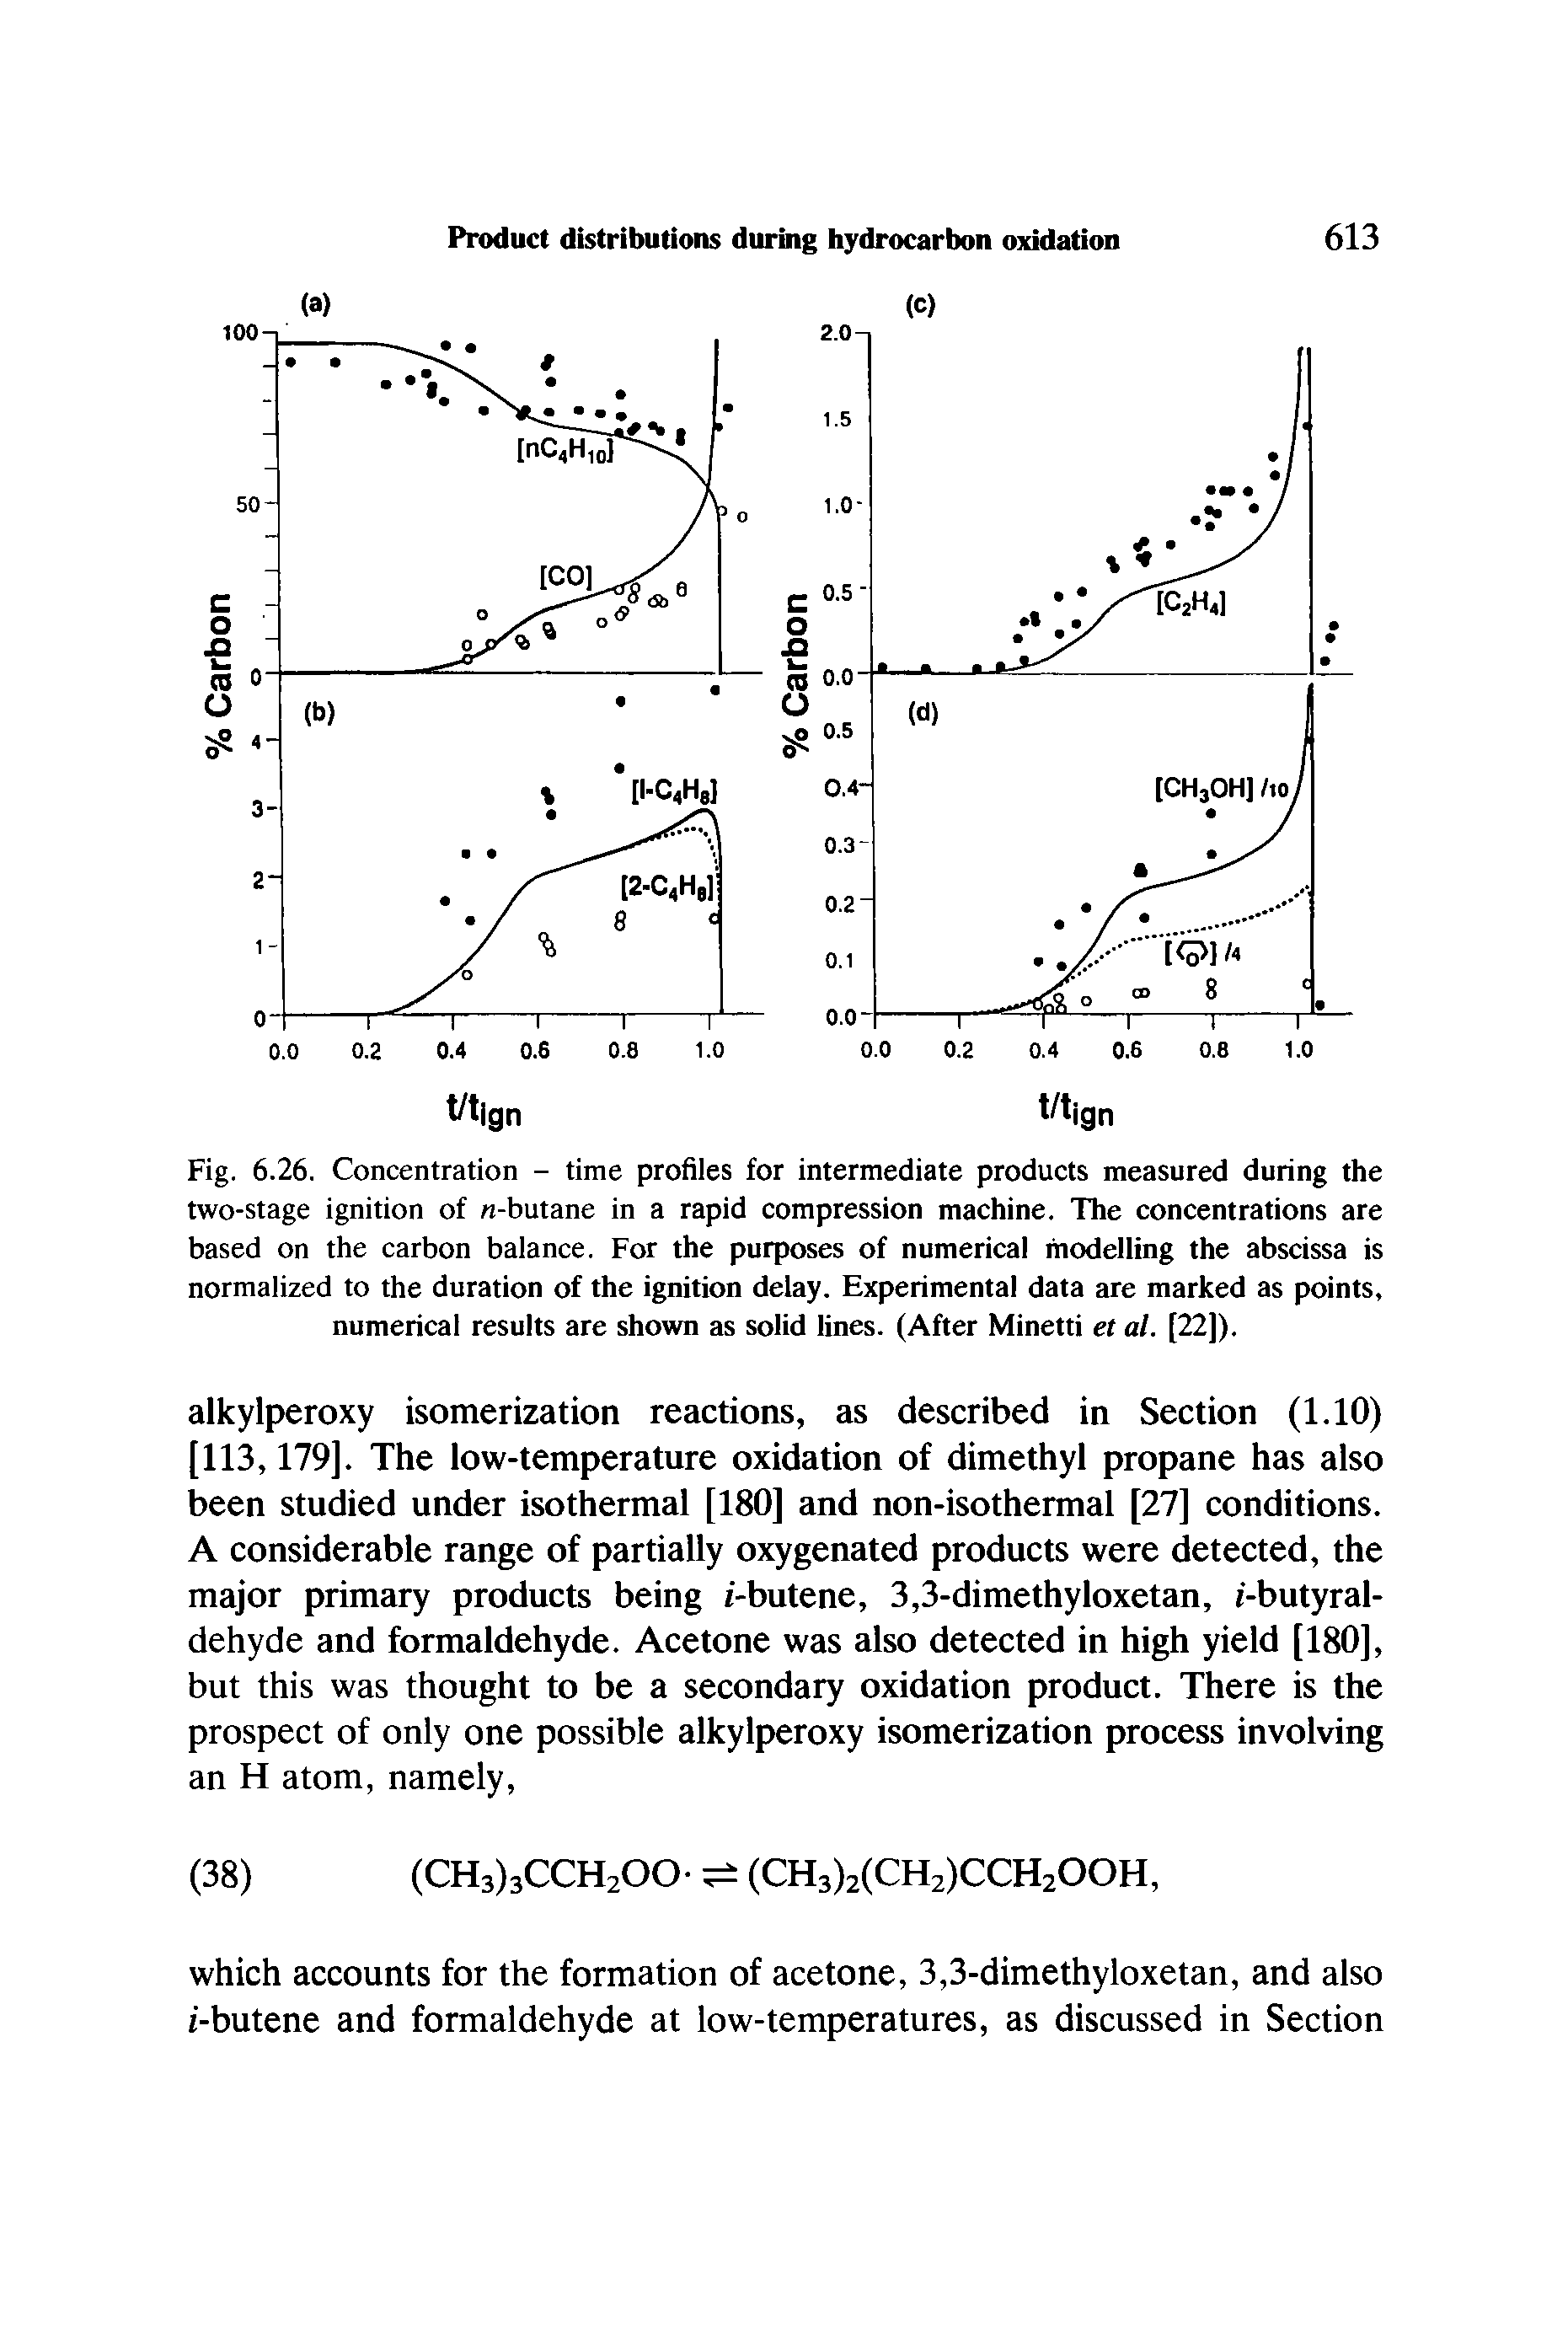 Fig. 6.26. Concentration - time profiles for intermediate products measured during the two-stage ignition of n-butane in a rapid compression machine. The concentrations are based on the carbon balance. For the purposes of numerical modelling the abscissa is normalized to the duration of the ignition delay. Experimental data are marked as points, numerical results are shown as solid lines. (After Minetti et al. [22]).